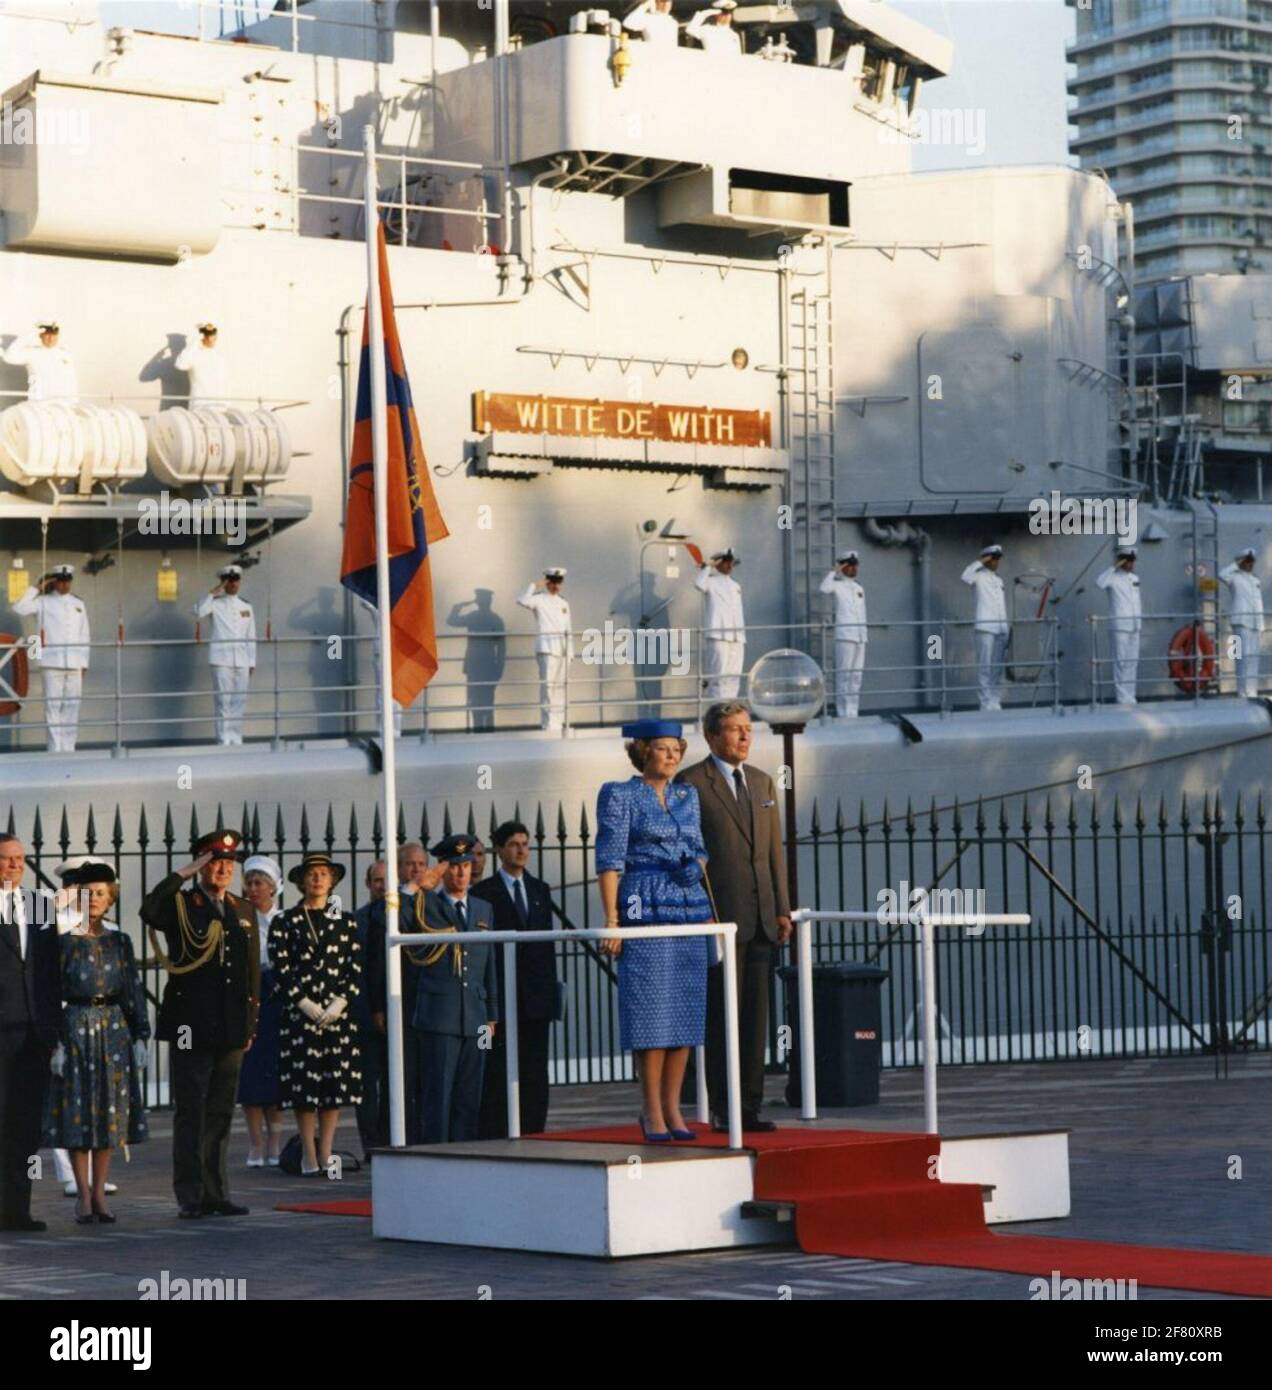 Queen Beatrix and Prince Claus visits the city of Adelaide in the context of the state visit to Australia. Support was given by the Fiarwind '88 squadron, consisting of the HR.MS supplies. Zuiderkruis (1975-), the air defense fribe Hr.Ms. White De With (1986-2005) and the standard faiths Hr.Ms. Kortenaer (1978-1997) and Hr.Ms. Jan van Brakel (1983-2001). Stock Photo